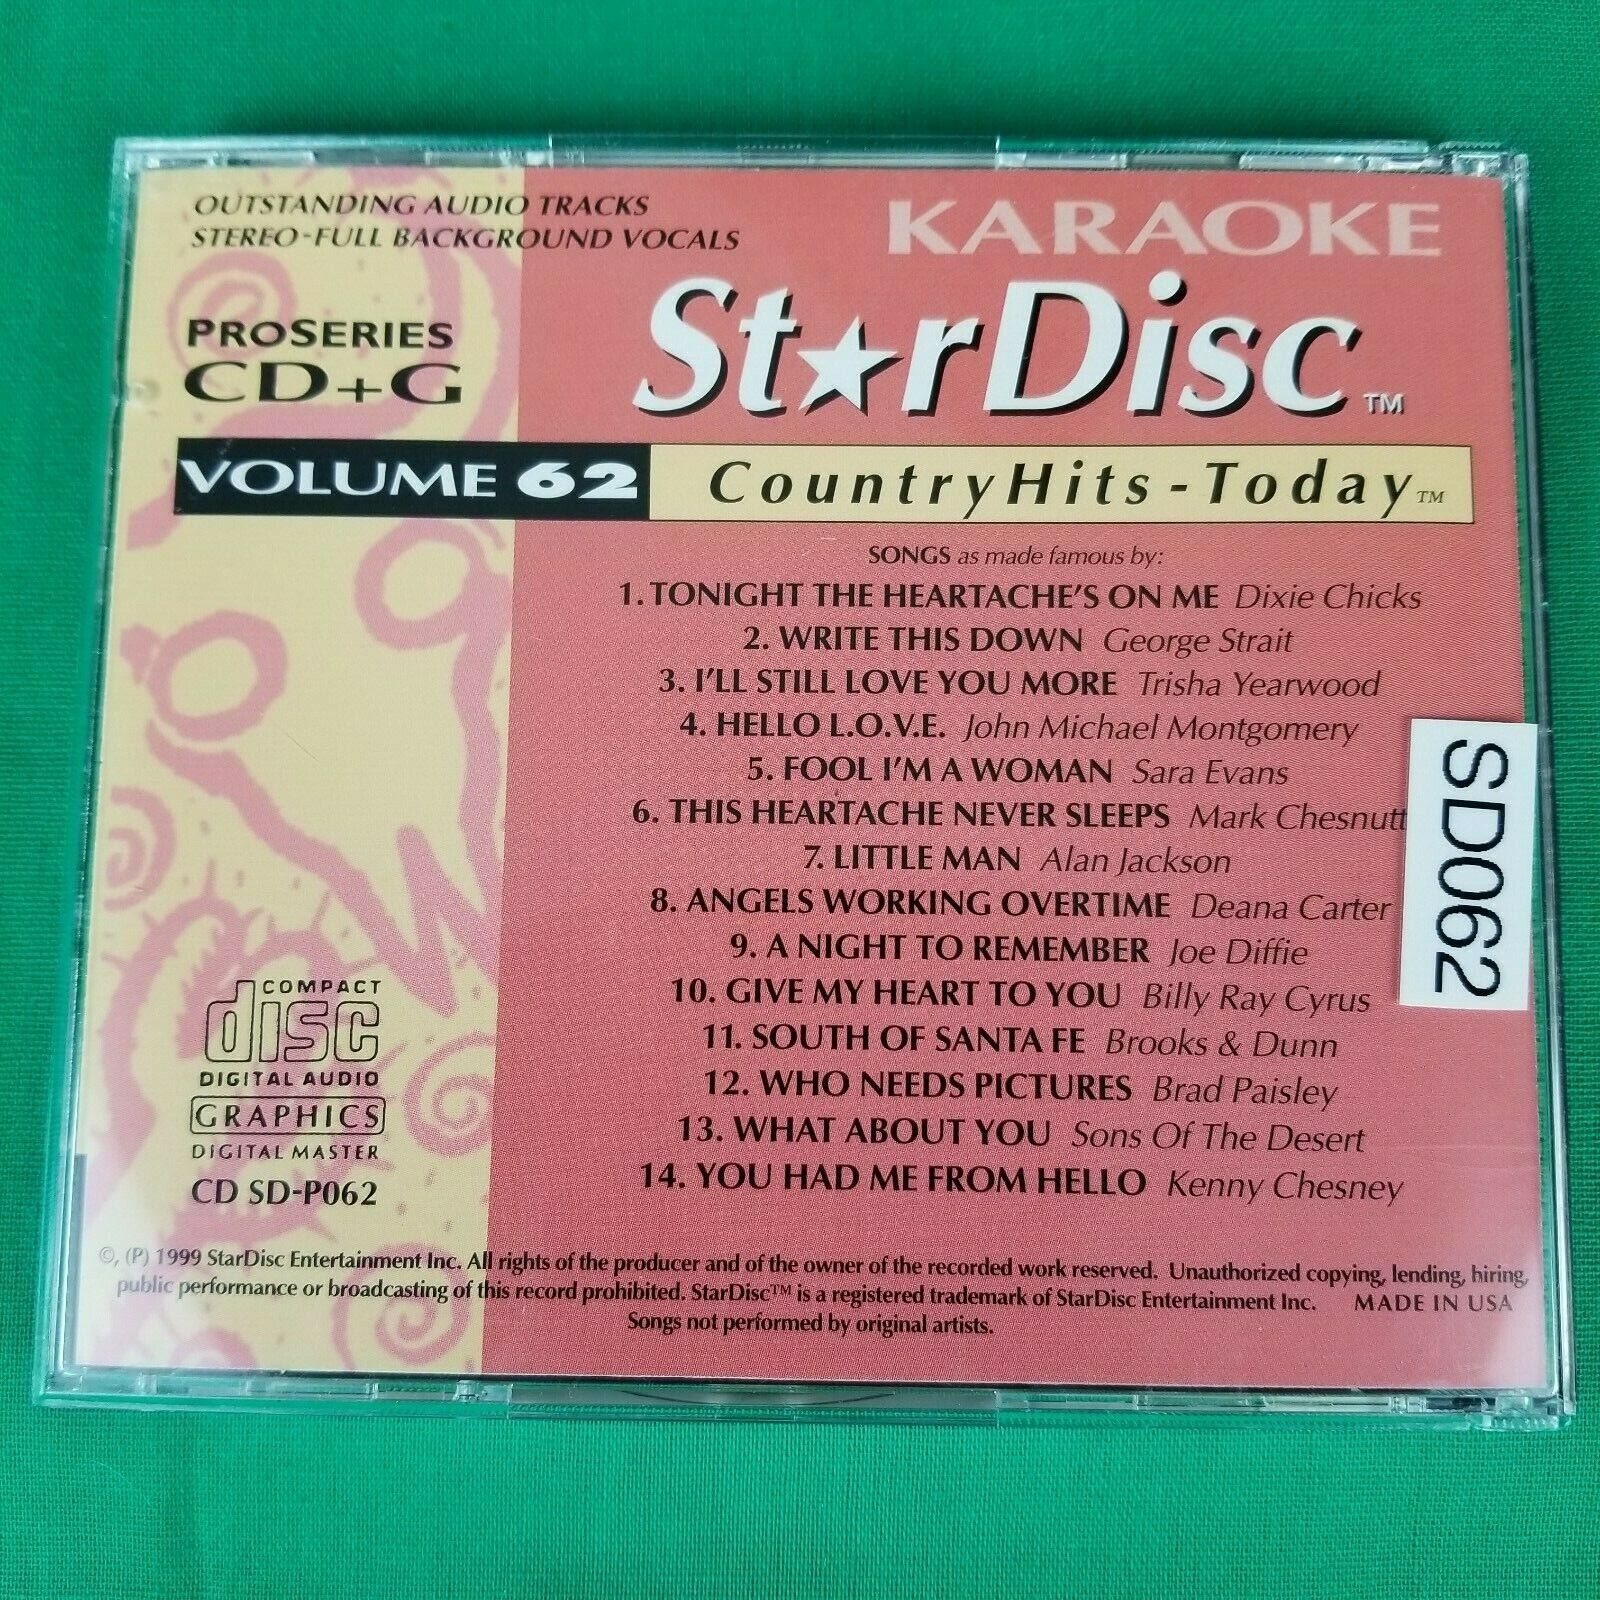 Pre-Owned Lot of 2 StarDisc Karaoke Country Classics CD+G Volume 62 & 71 Star Disc - фотография #3